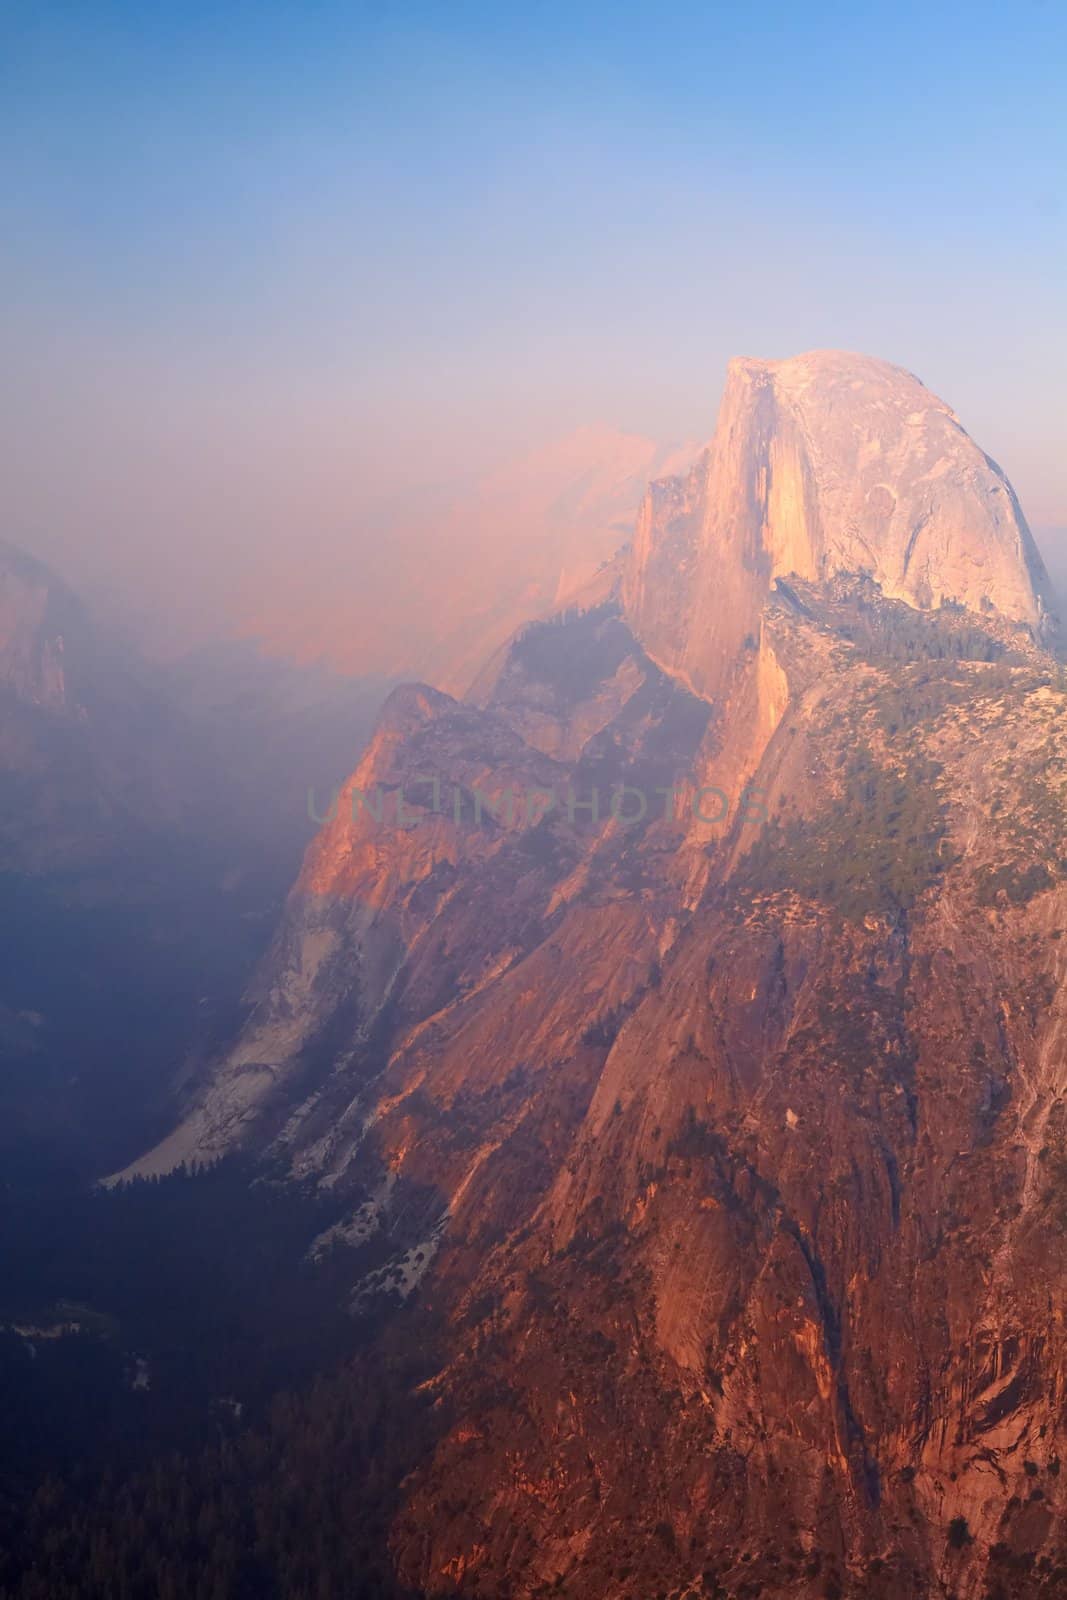 Half Dome at Sunset, Yosemite Valley by LoonChild